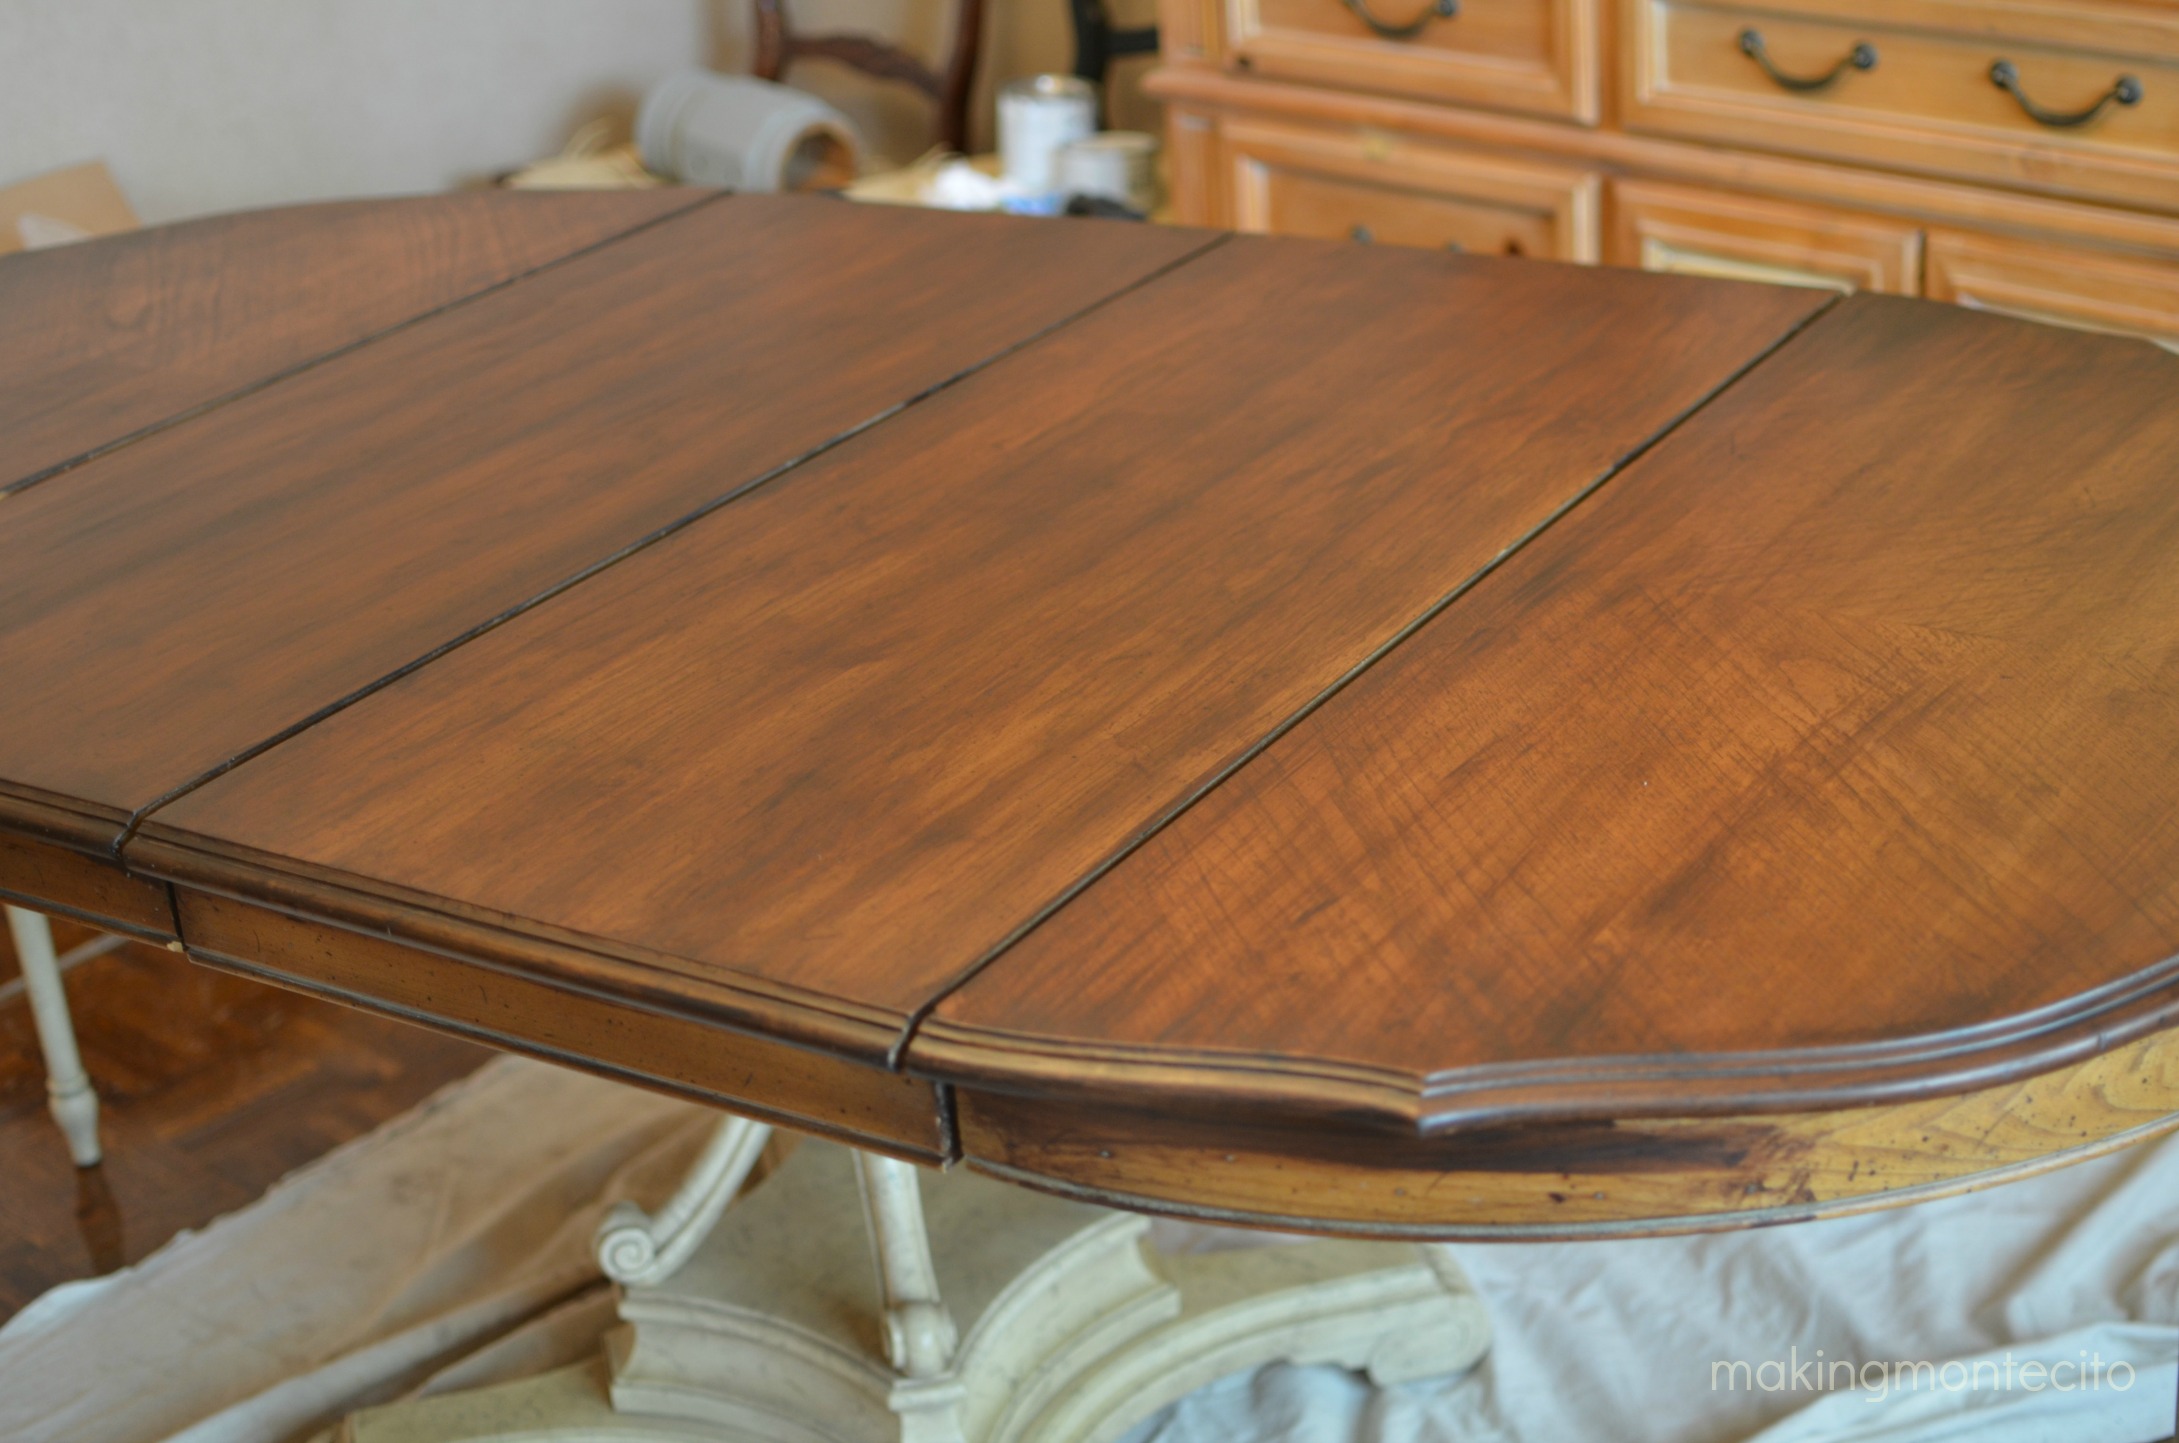 Vintage dining table updated - making montecito 3